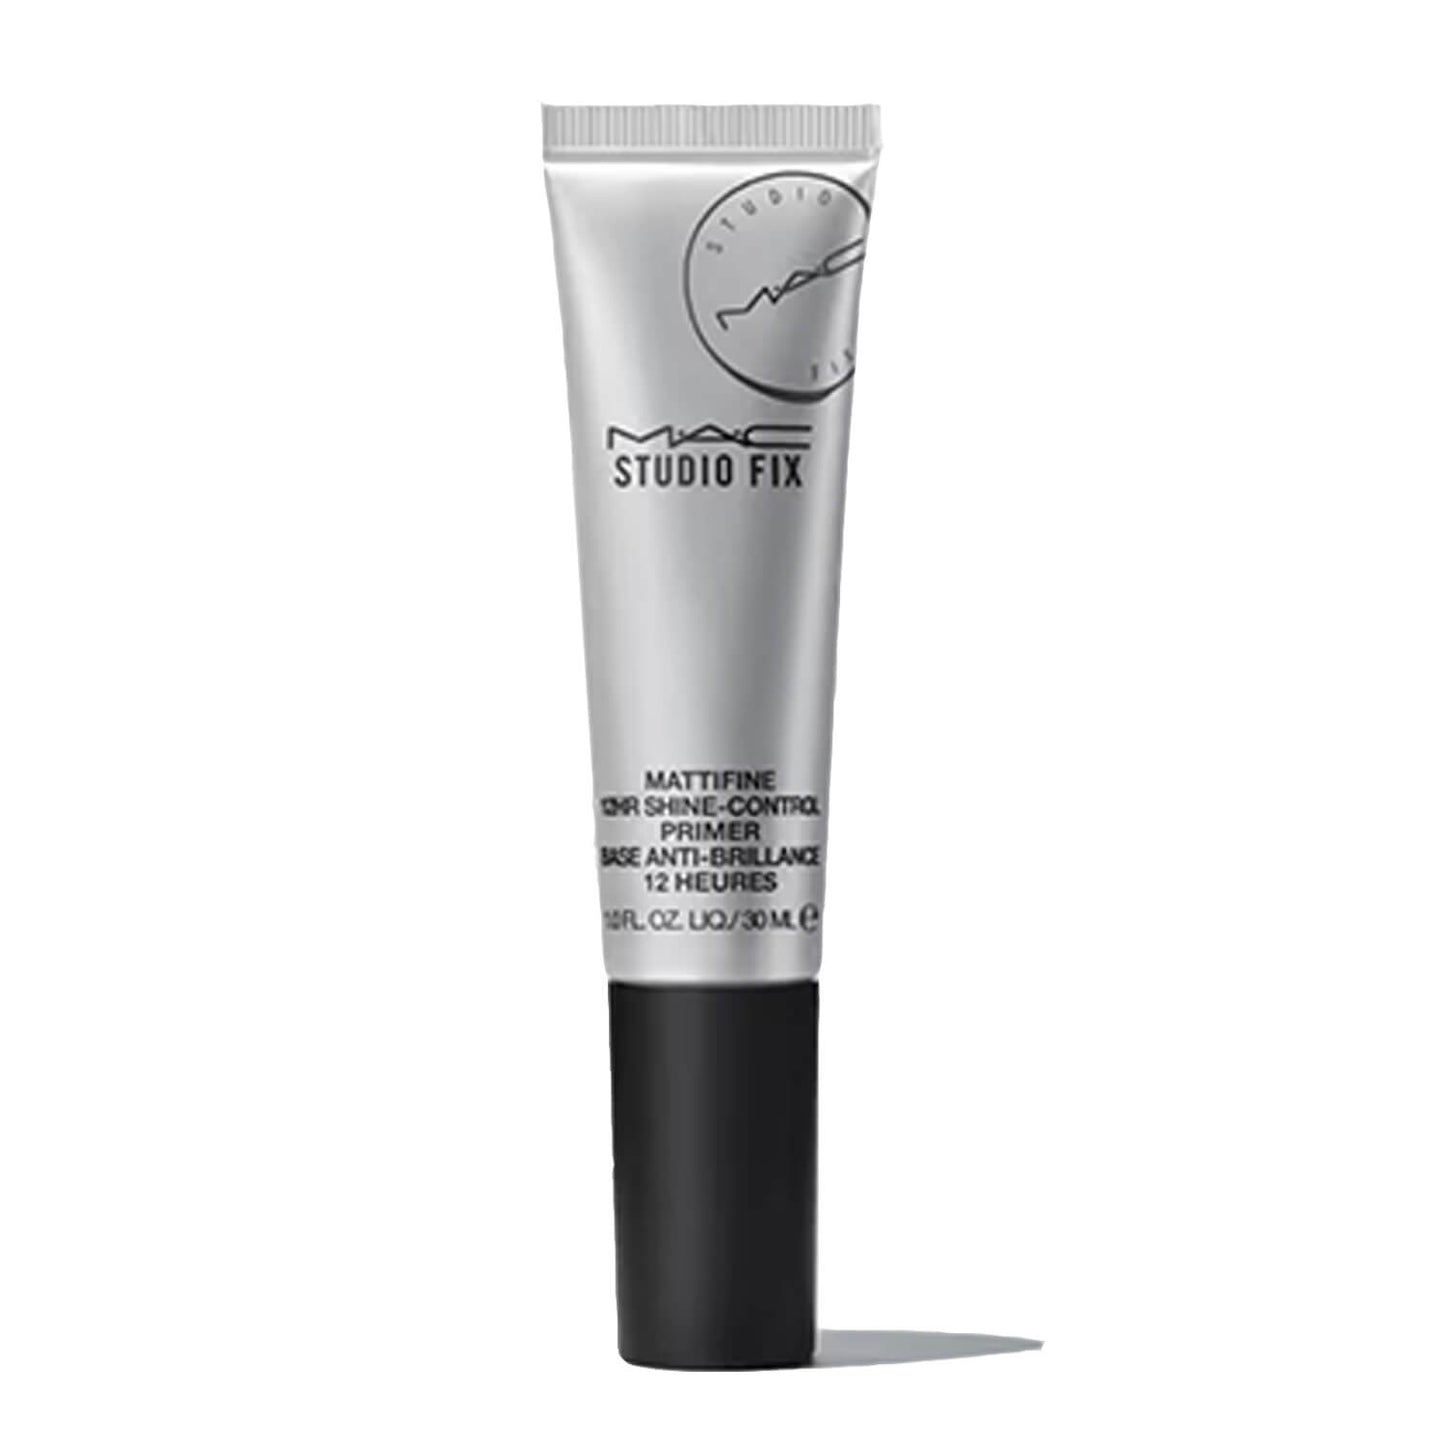 shop mac studio fix primer available at heygirl.pk for delivery in Pakistan